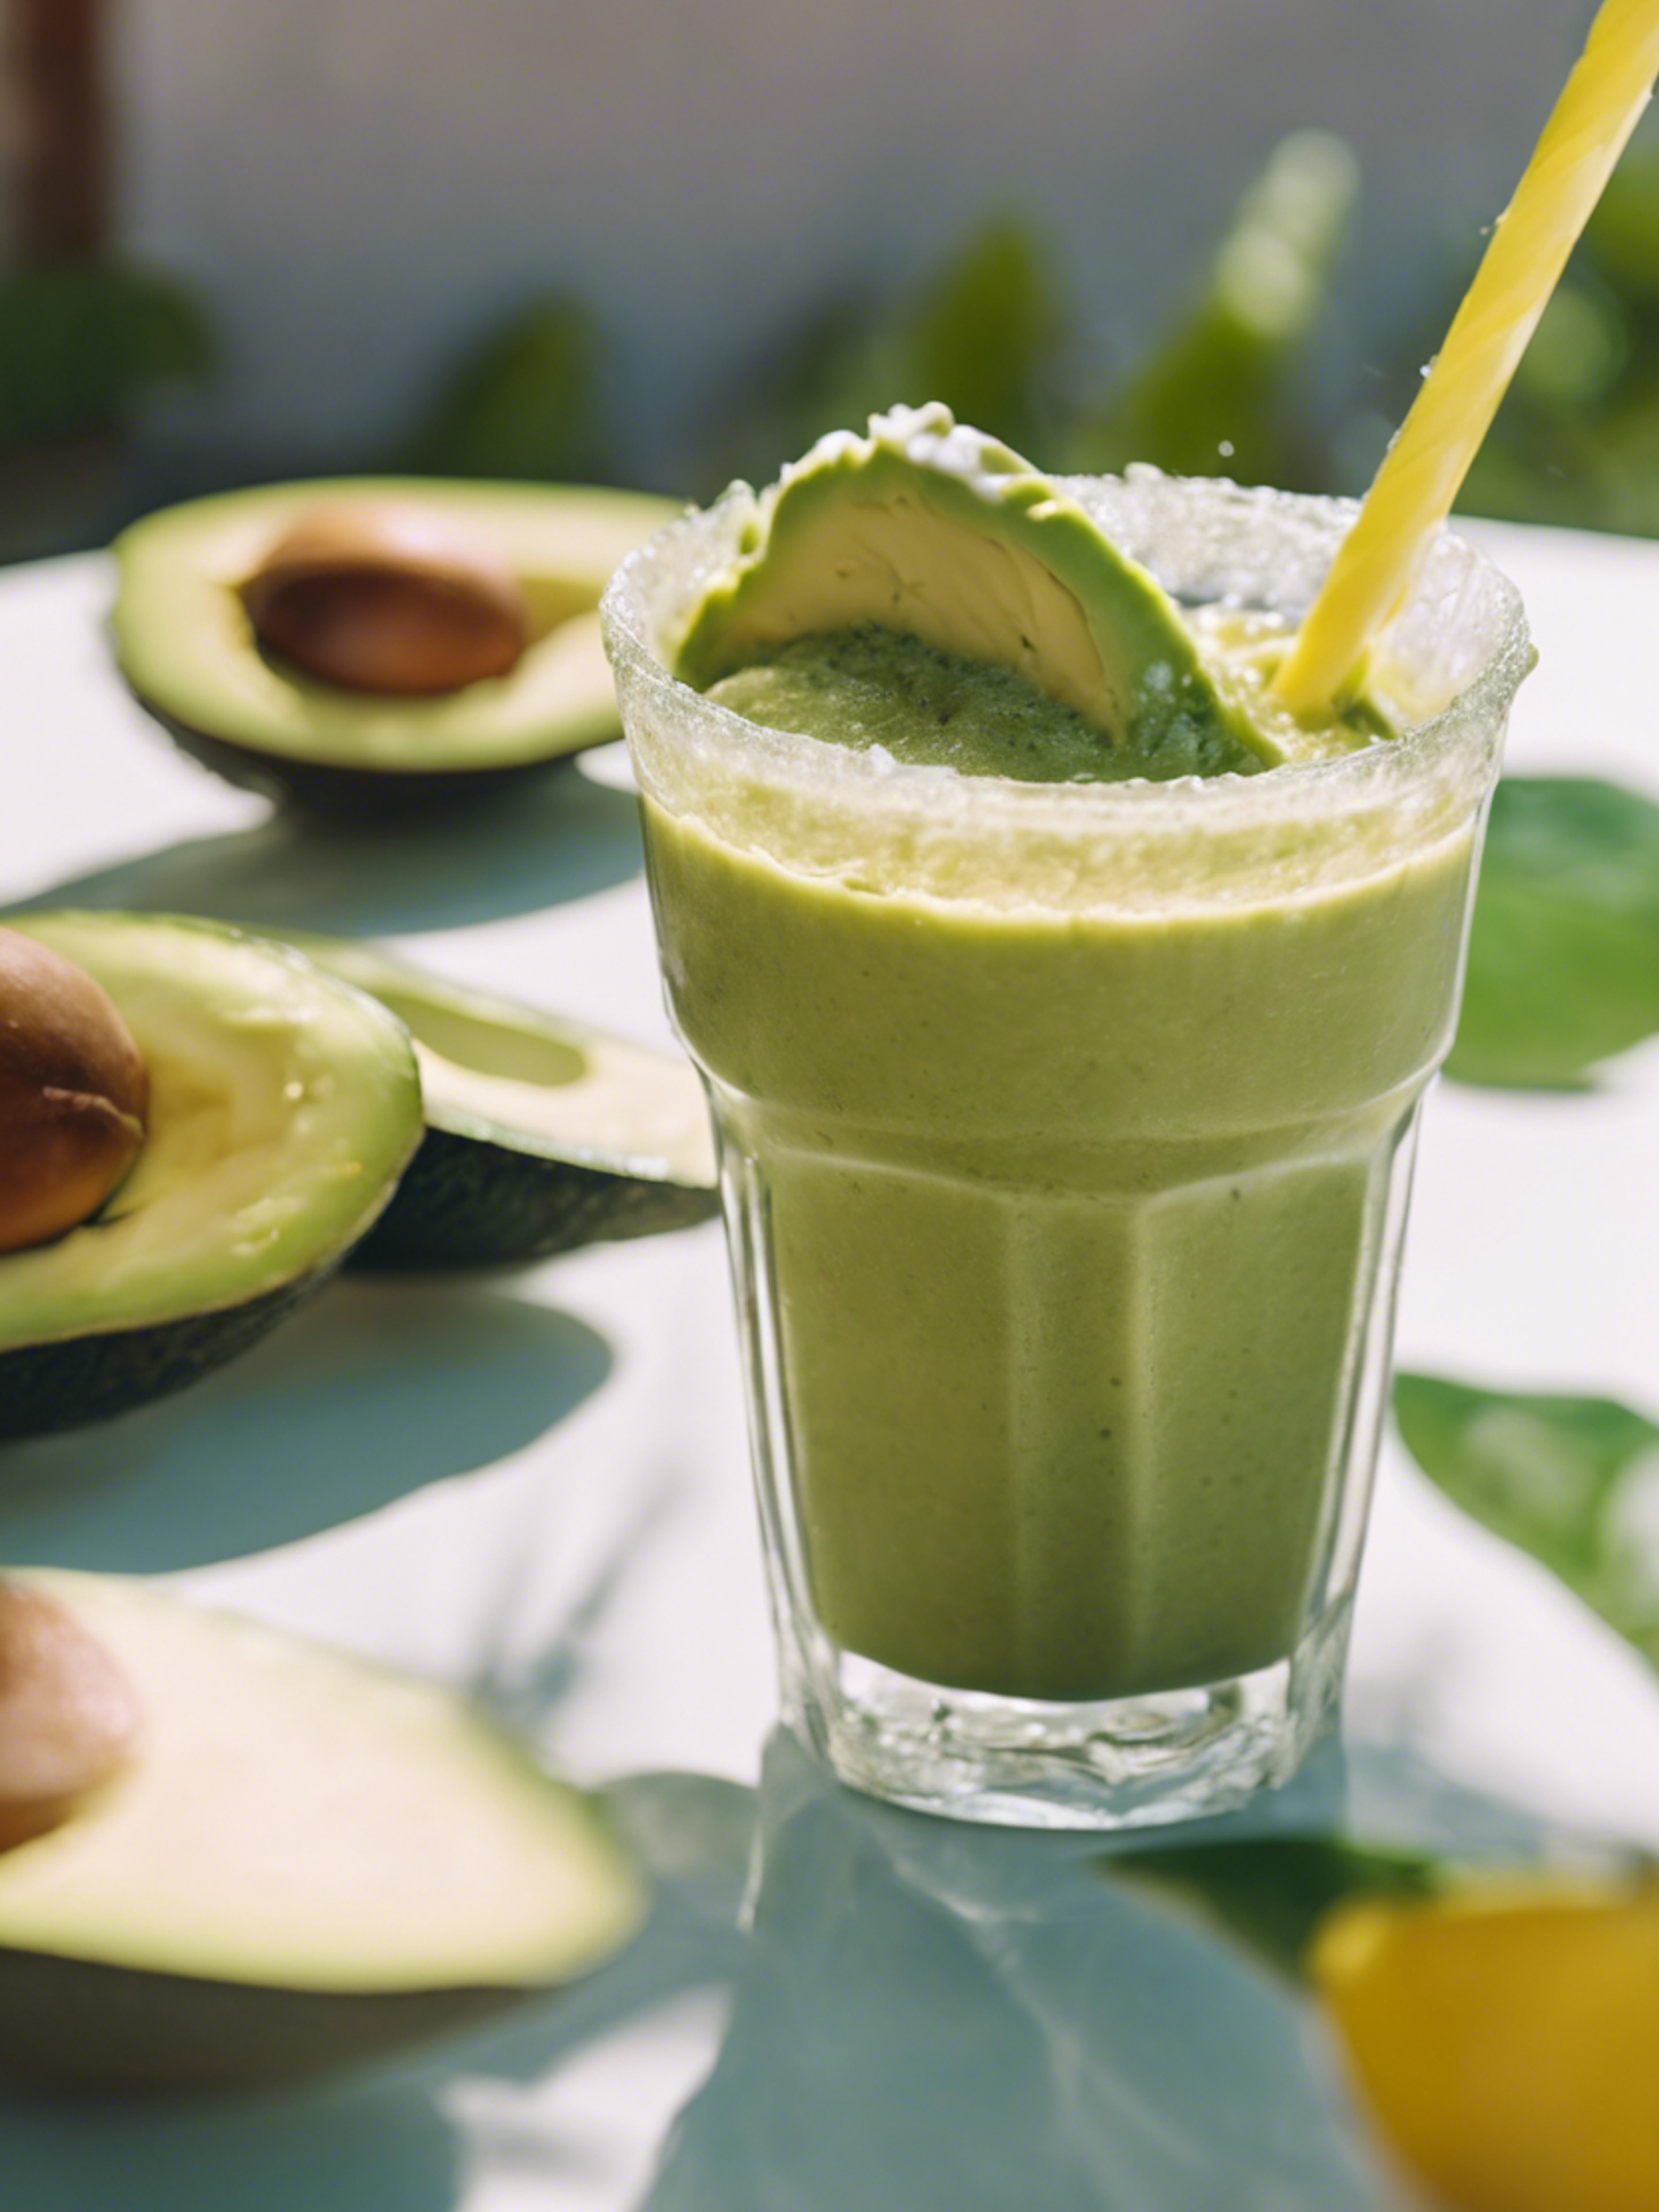 A playful avocado sipping on tropical smoothie on a hot summer day 墙纸[3b128a2f6f1a4fb38d08]